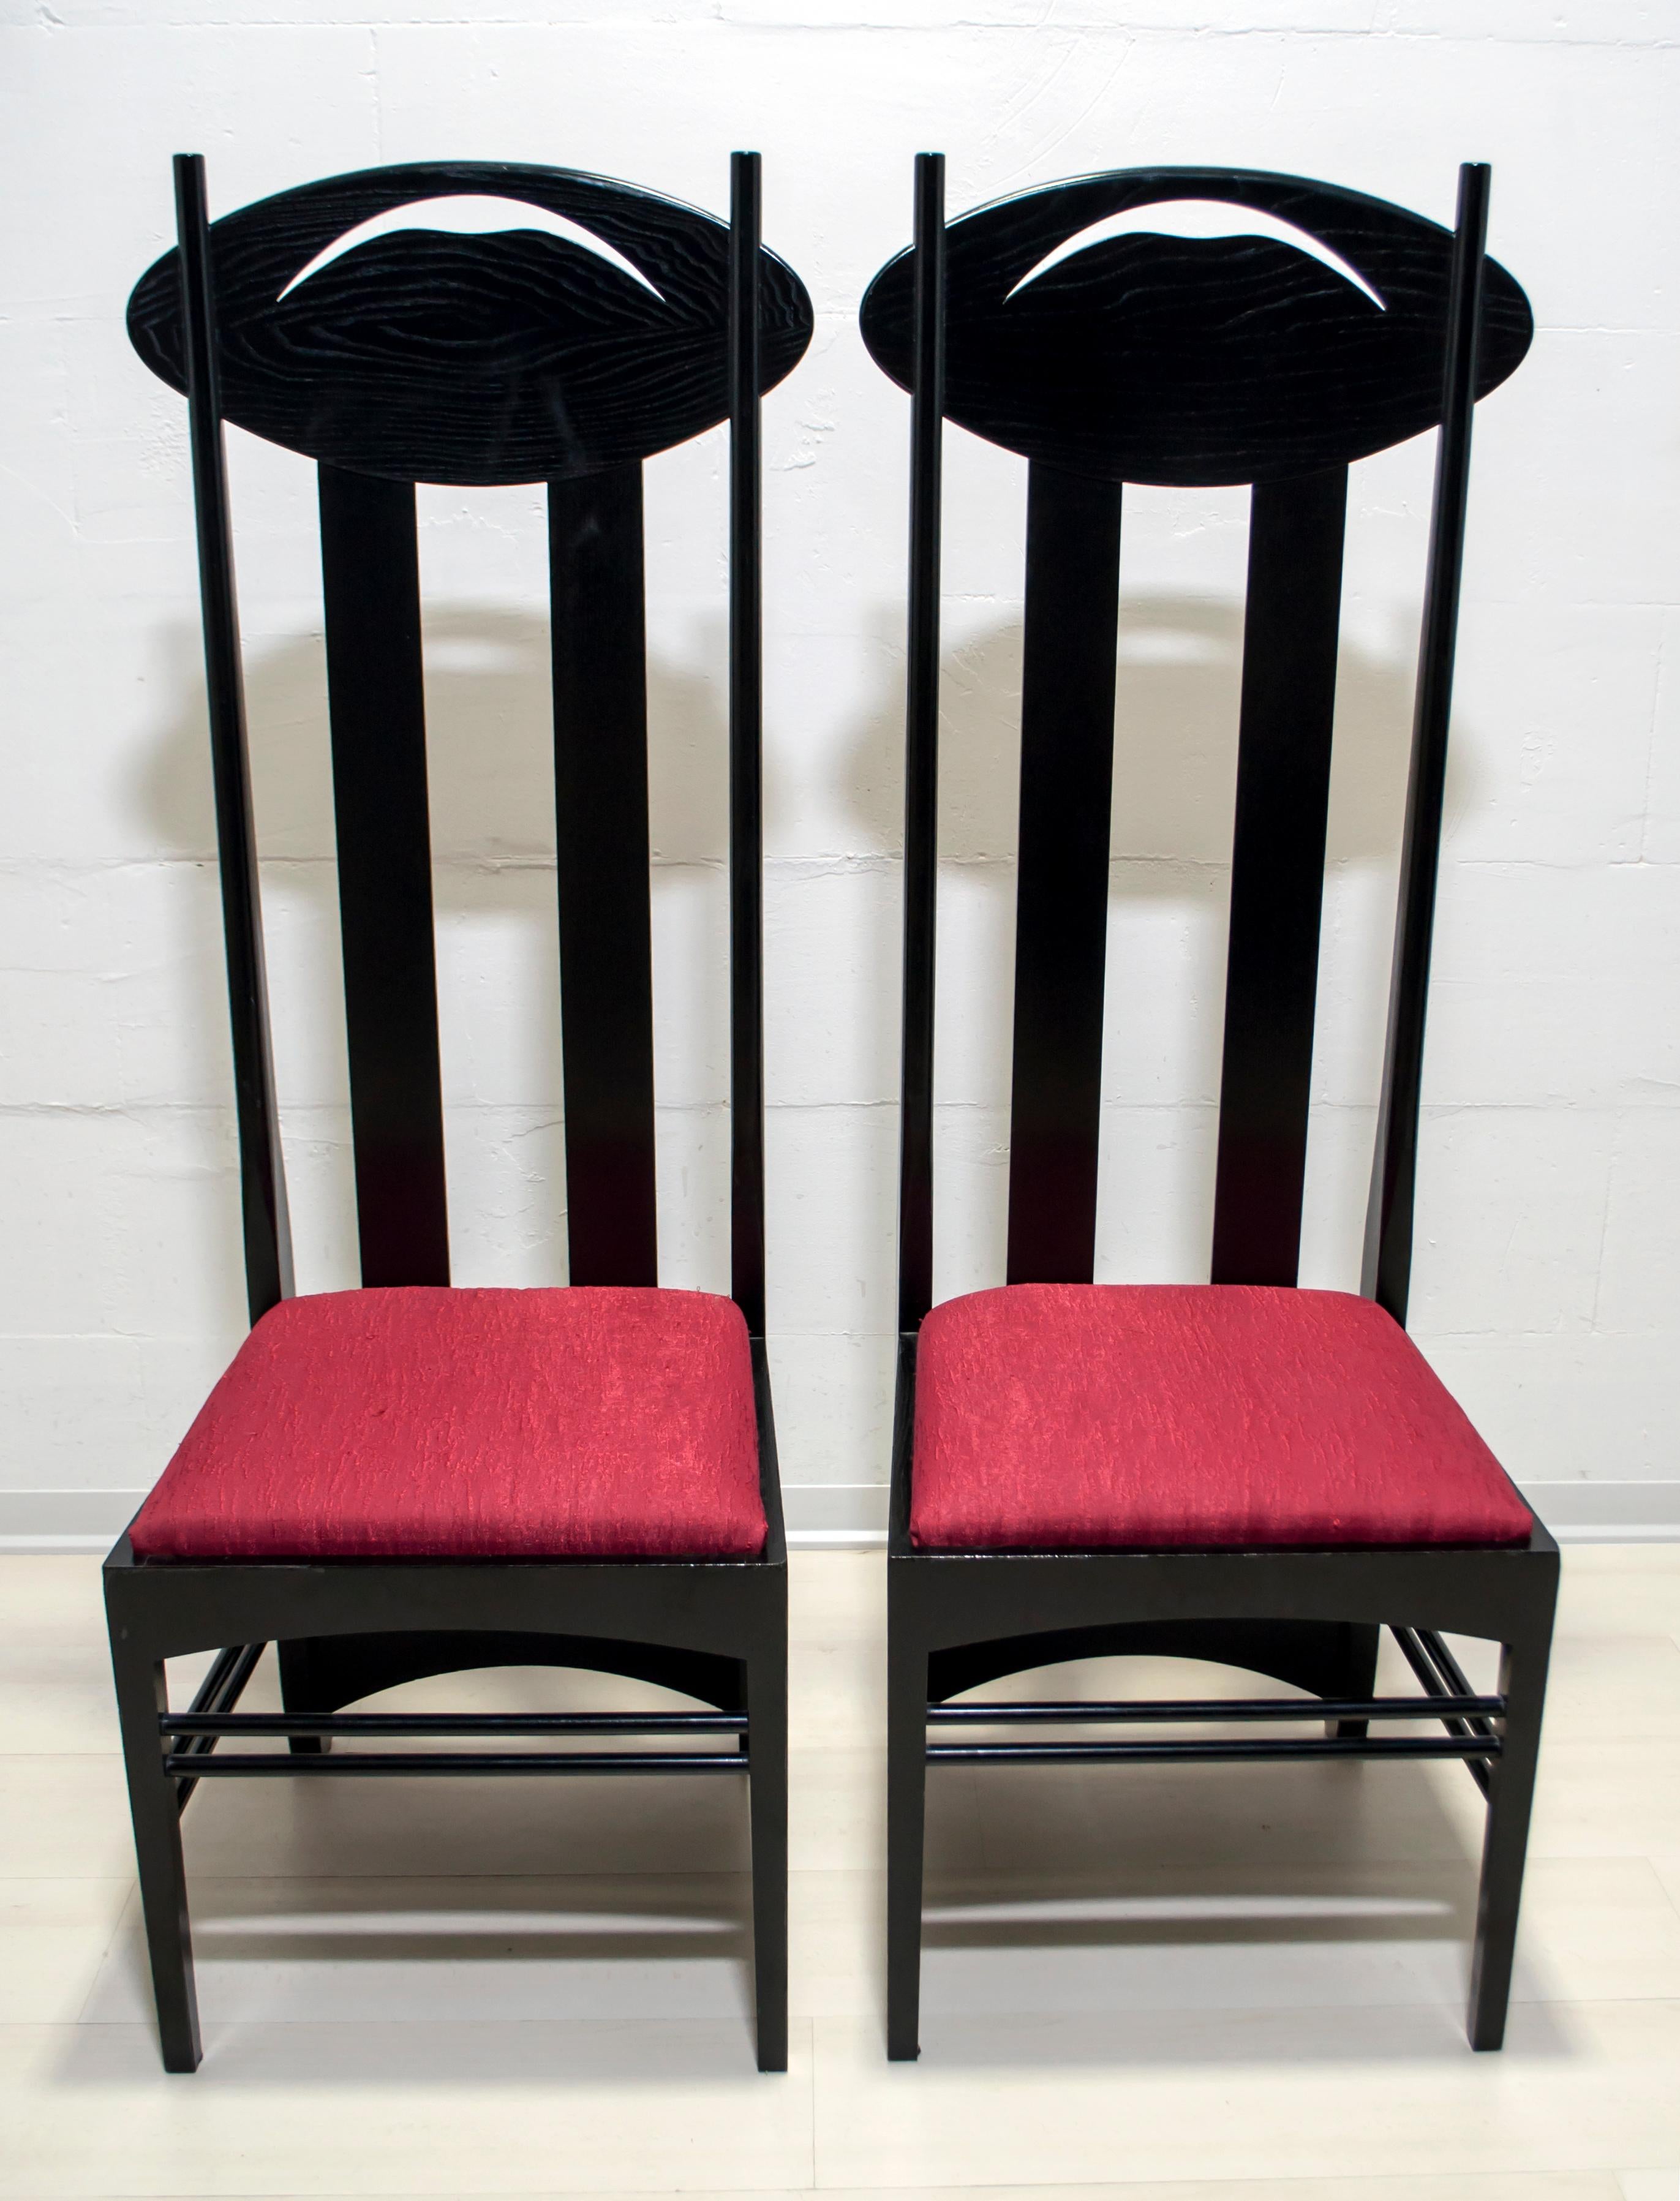 This chair was exhibited at the Eighth Secession Exhibition in Vienna, Austria in 1900, where Mackintosh with his individual style contributed to the development of the Wiener Werkstätte, a famous Viennese design firm, founded in 1903 by Josef